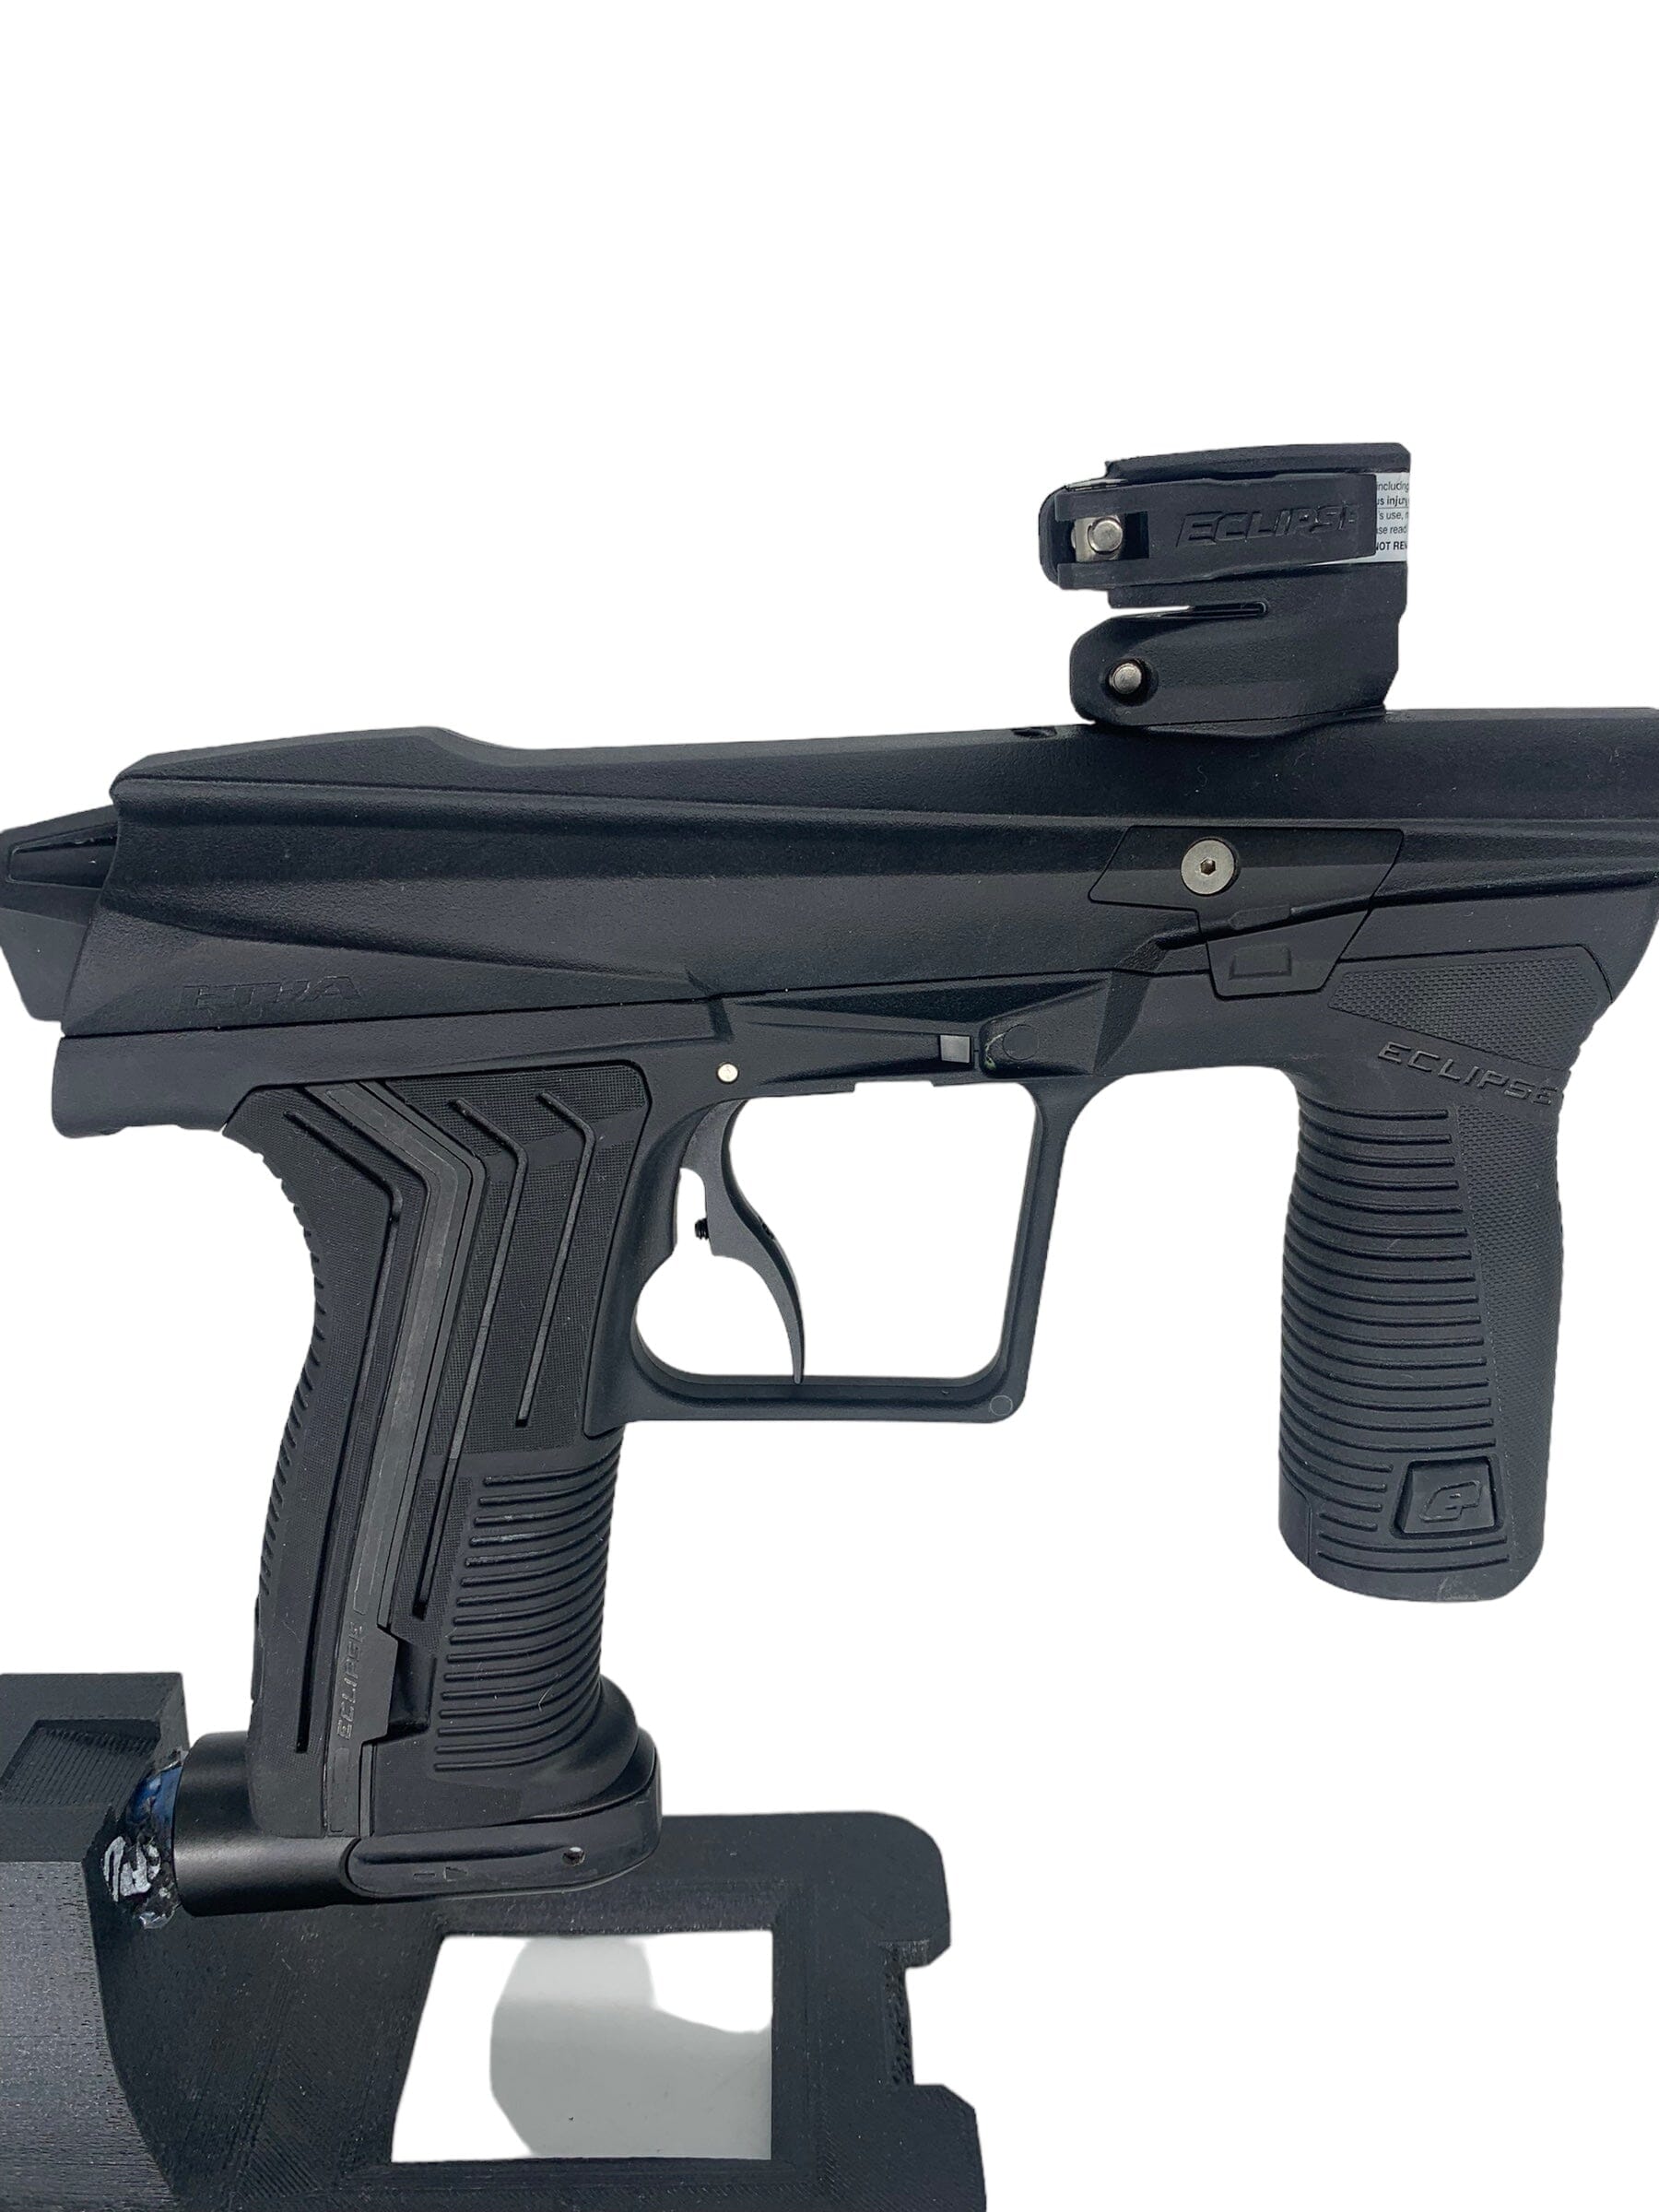 Used Planet Eclipse Etha 2 Pal Paintball Gun Paintball Gun from CPXBrosPaintball Buy/Sell/Trade Paintball Markers, New Paintball Guns, Paintball Hoppers, Paintball Masks, and Hormesis Headbands